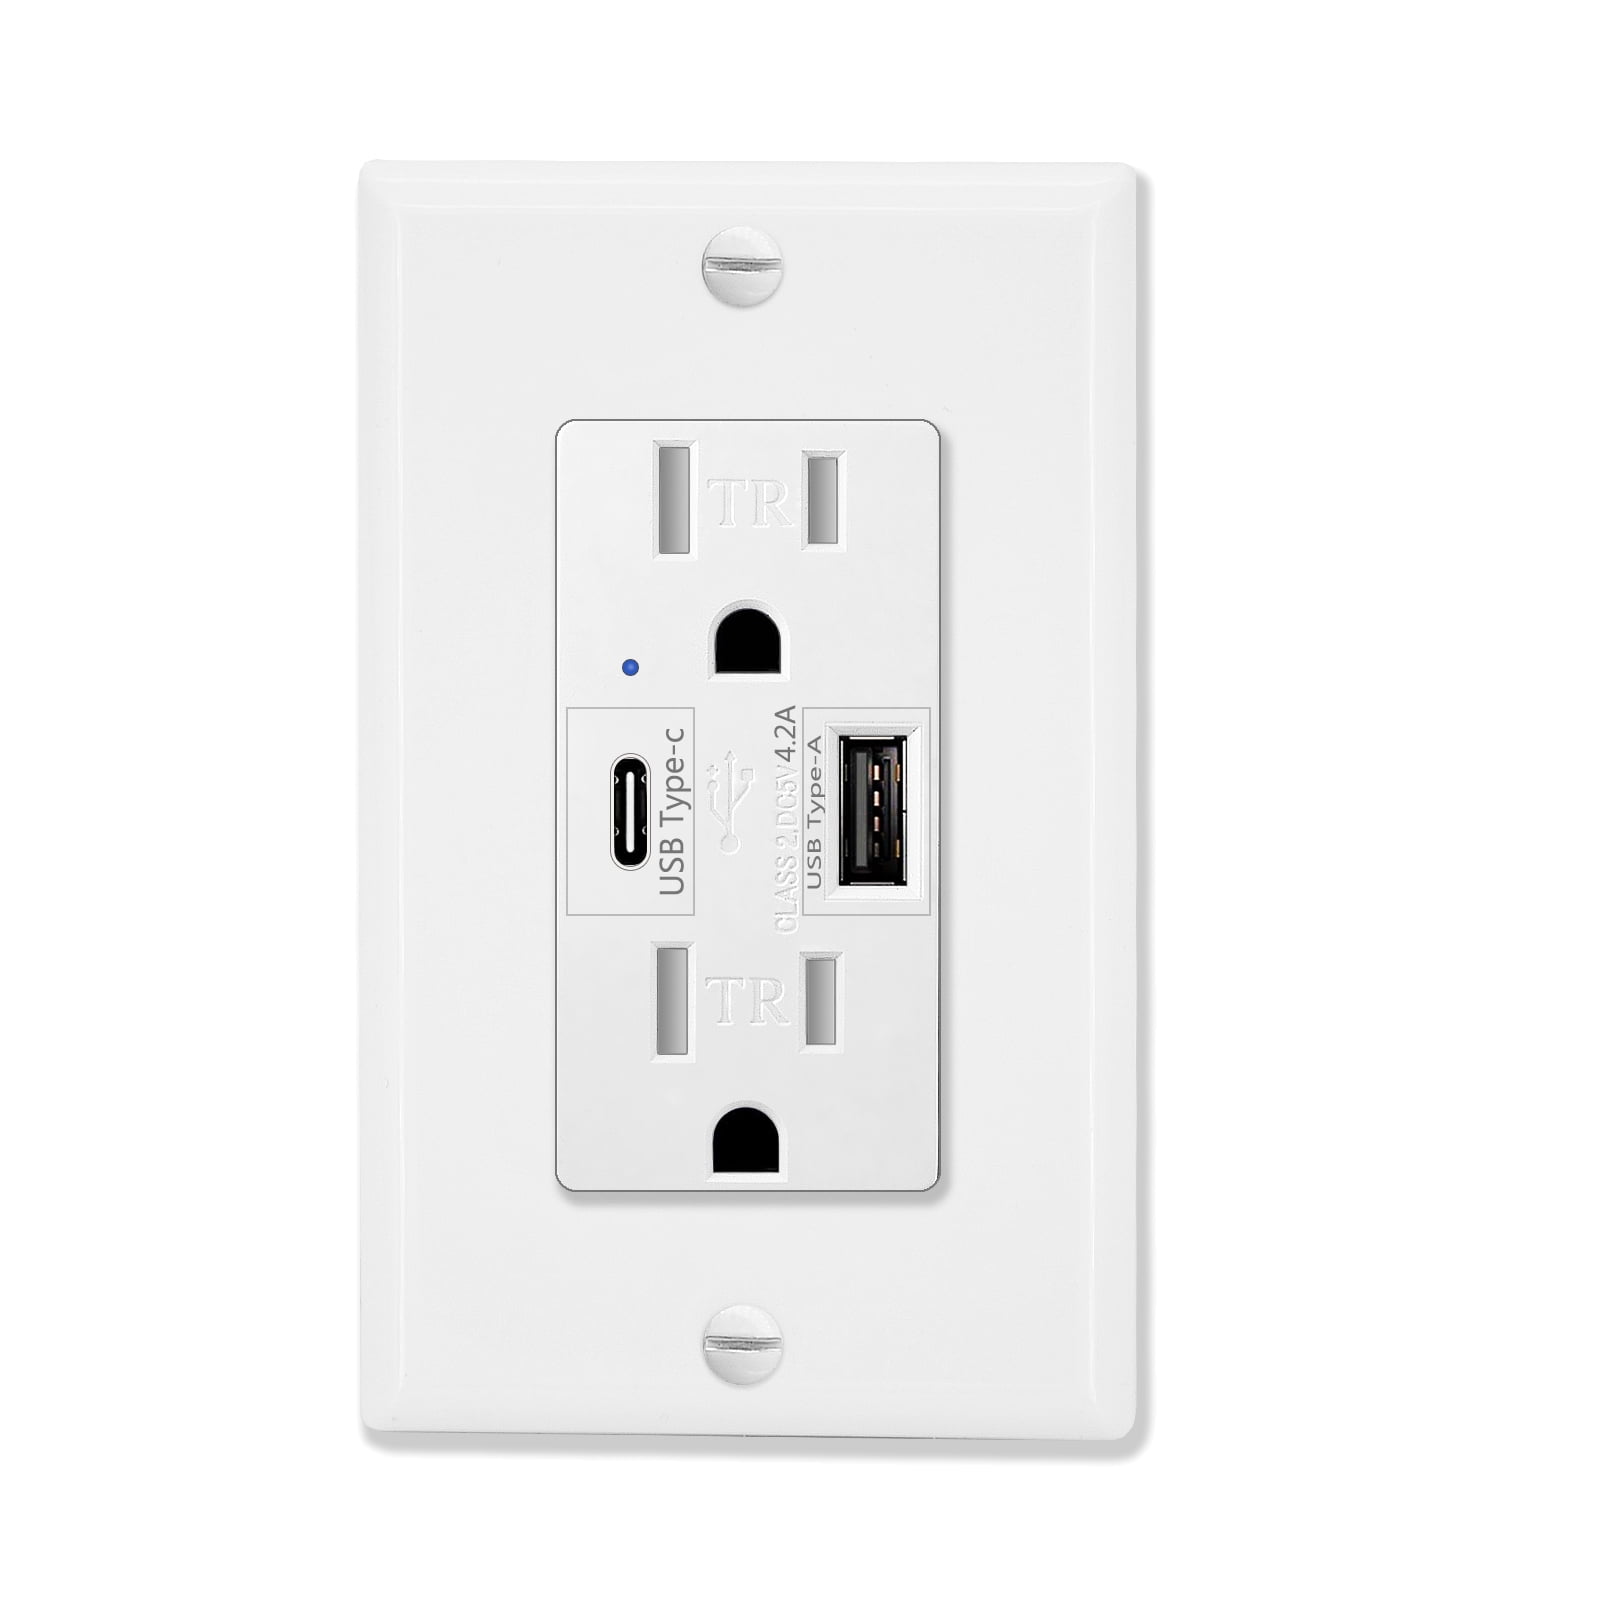 2PCS Dual USB Port US Wall Socket Charger AC Power Receptacle Outlet Plate Panel 